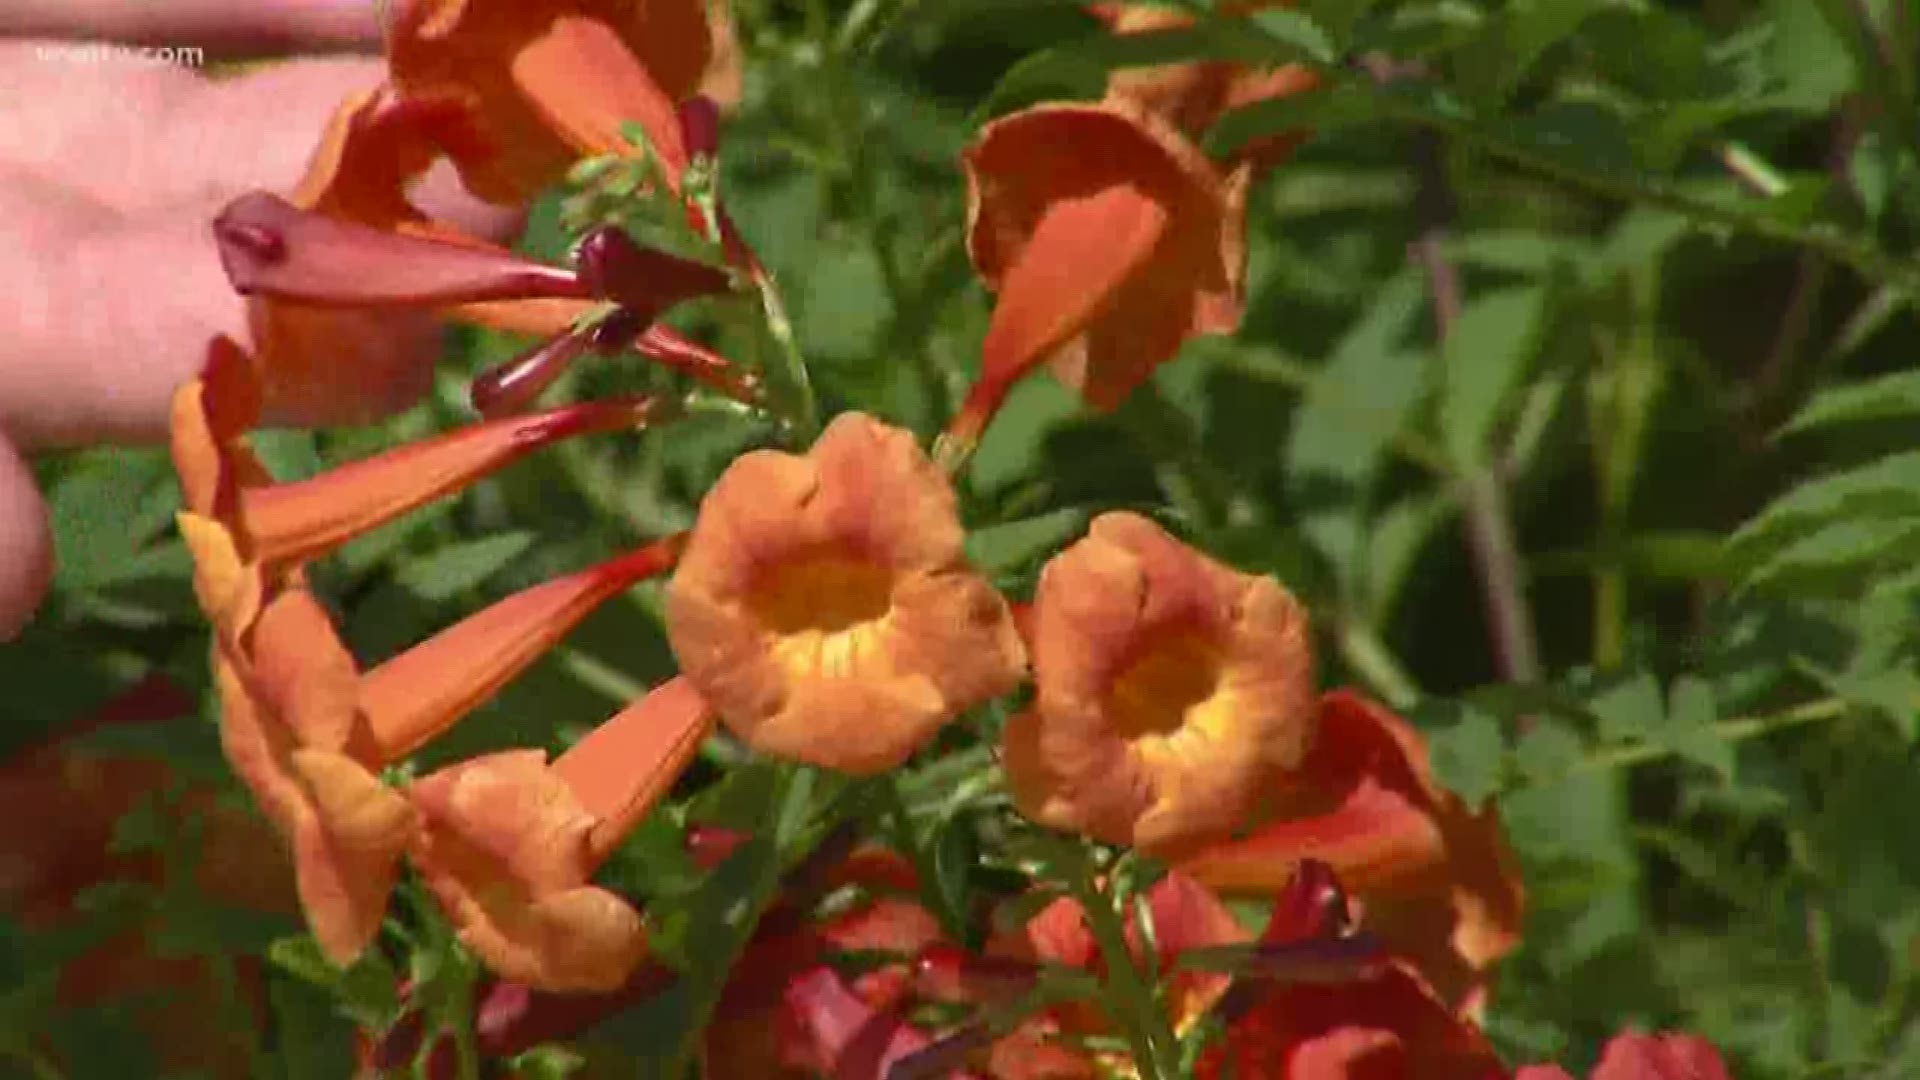 Dan Gill suggests some heat tolerant plants that will provide color throughout the summer.